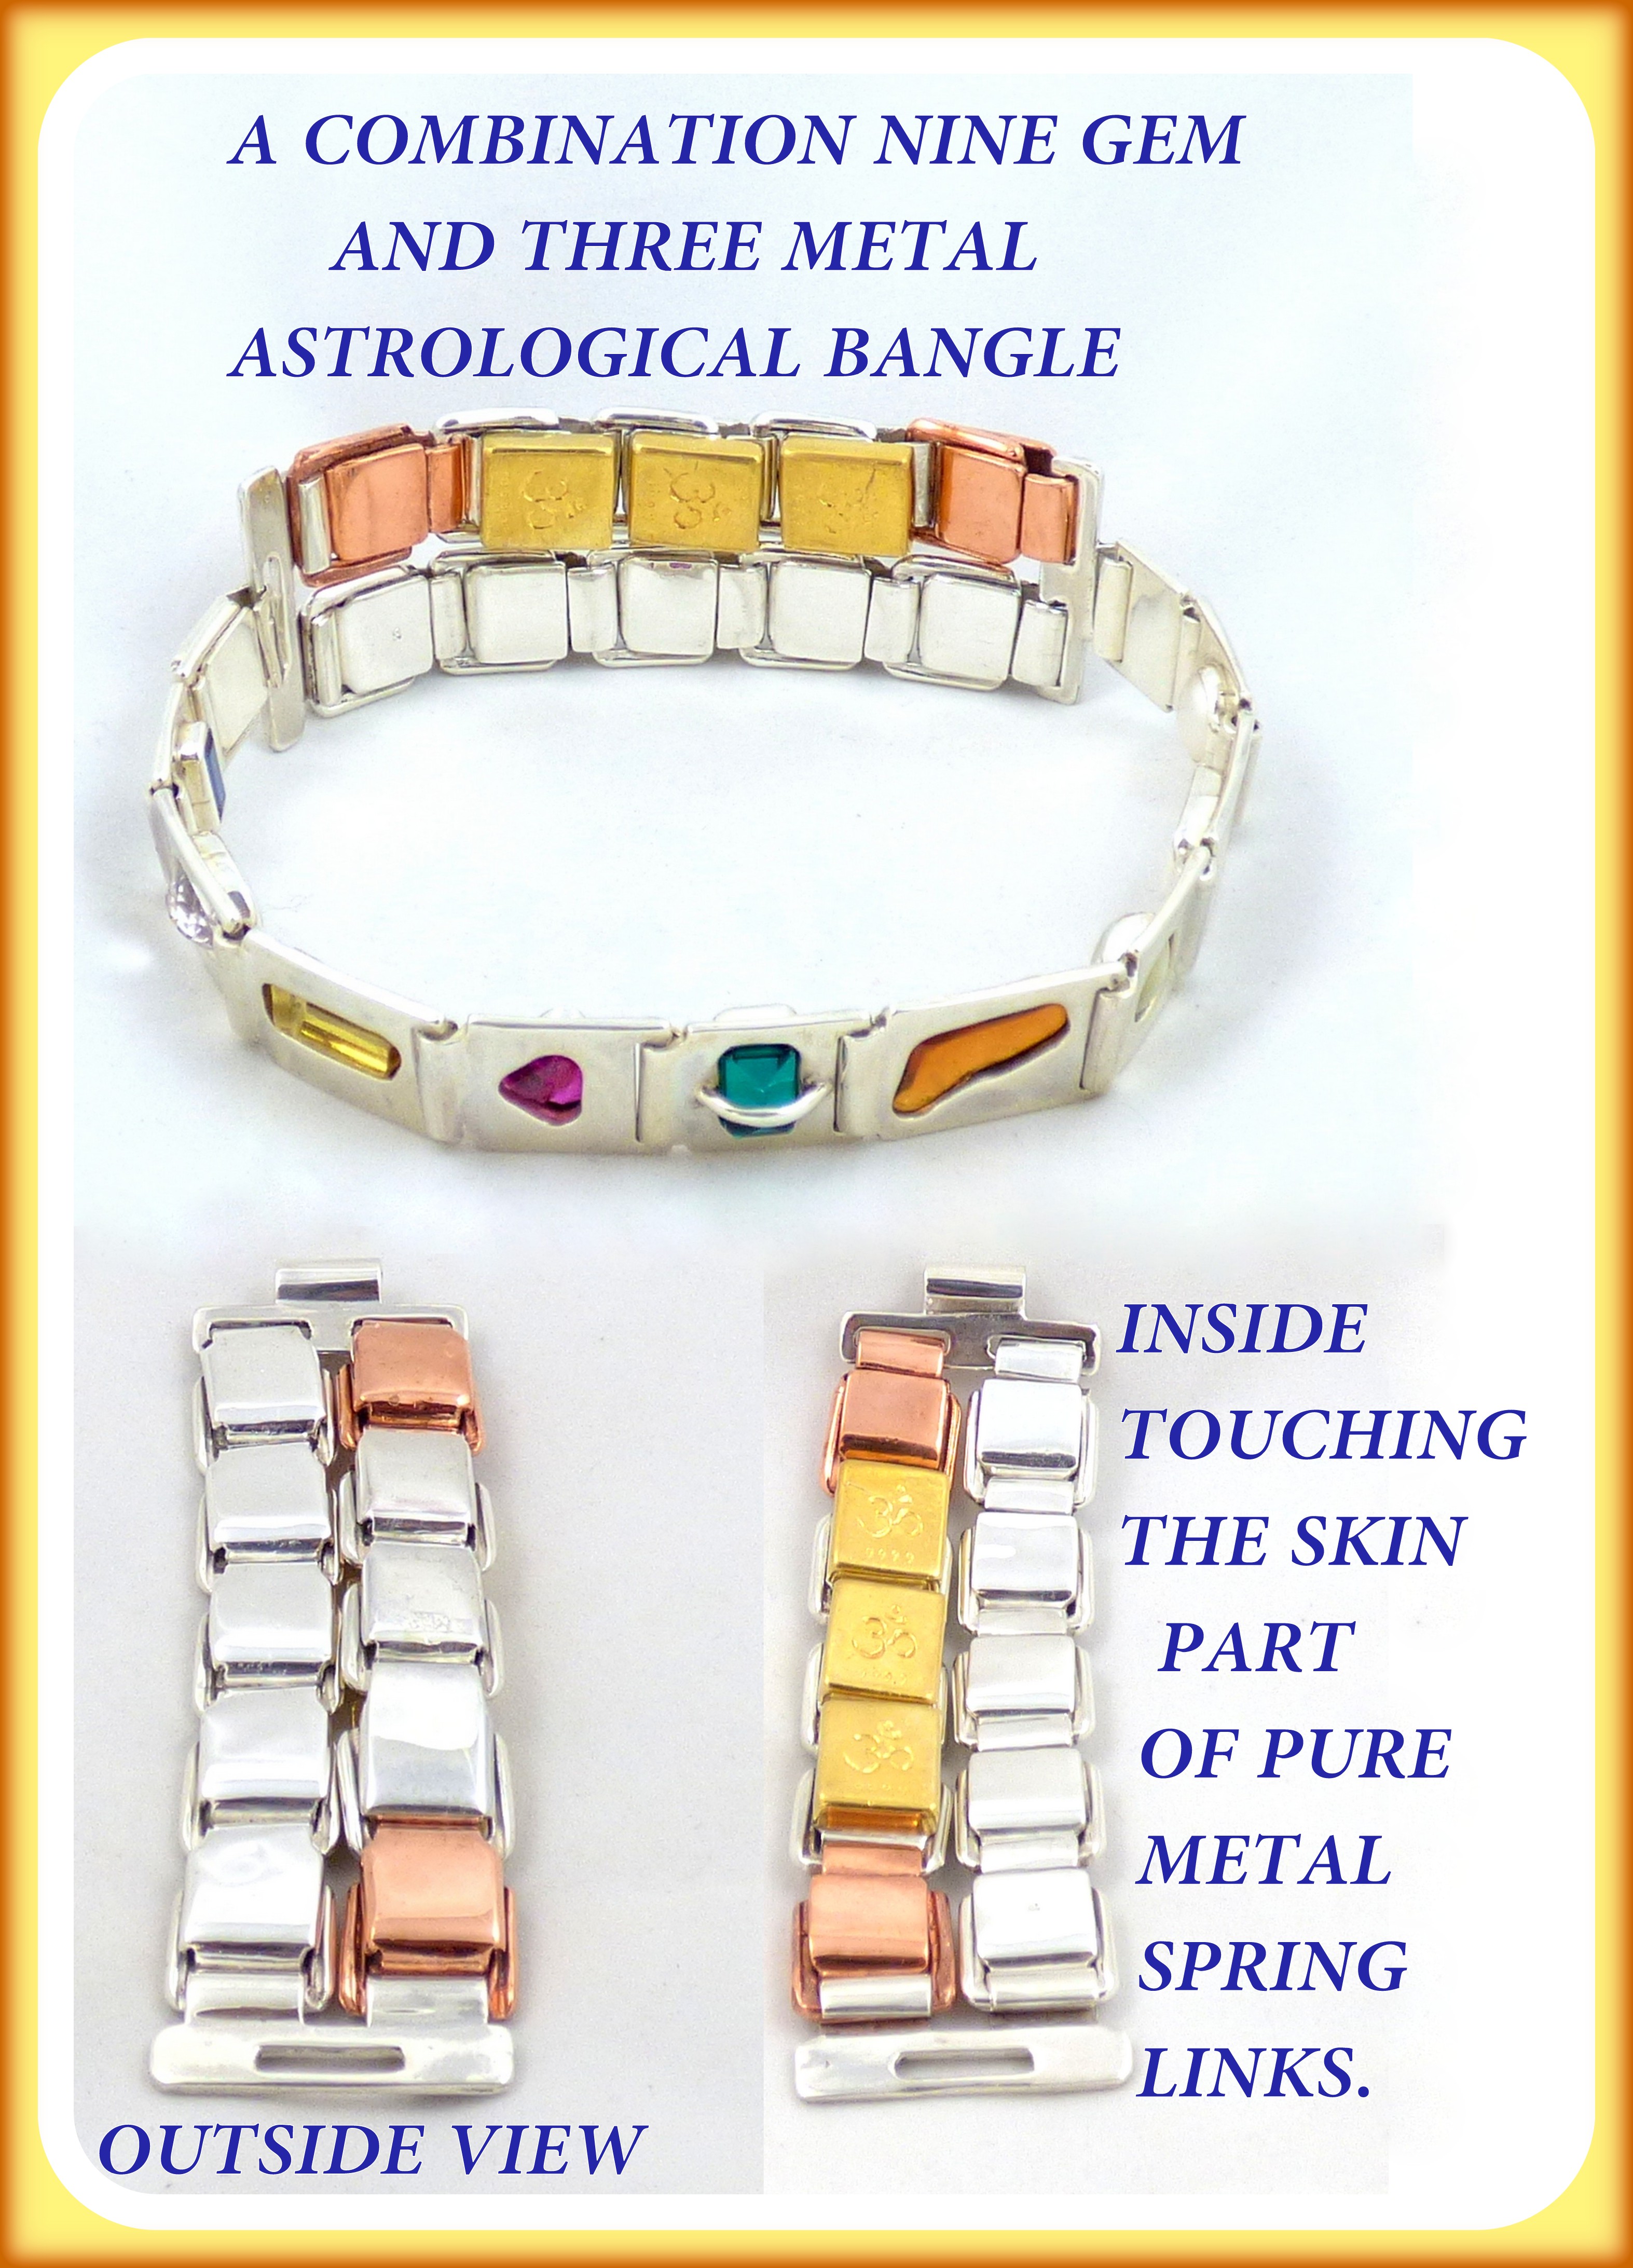 A combination nine gem (navaratna) and three metal astrological bangle, including a top, outside and inside view.